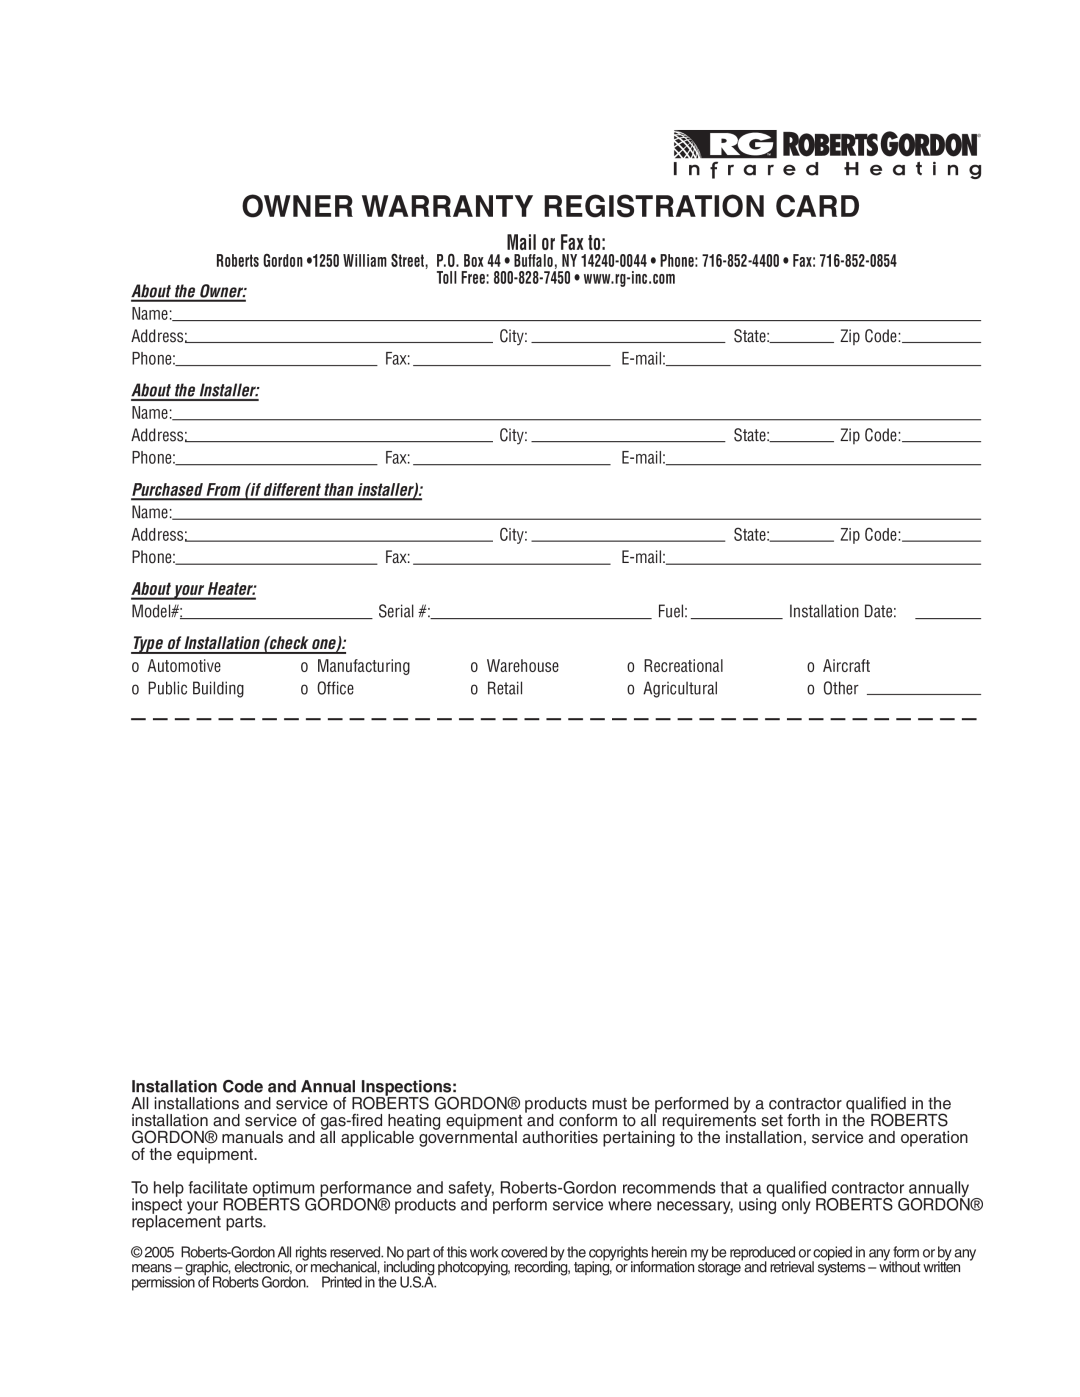 Roberts Gorden CGTH-50, CGTH-30 Owner Warranty Registration Card, About the Owner, About the Installer, About your Heater 